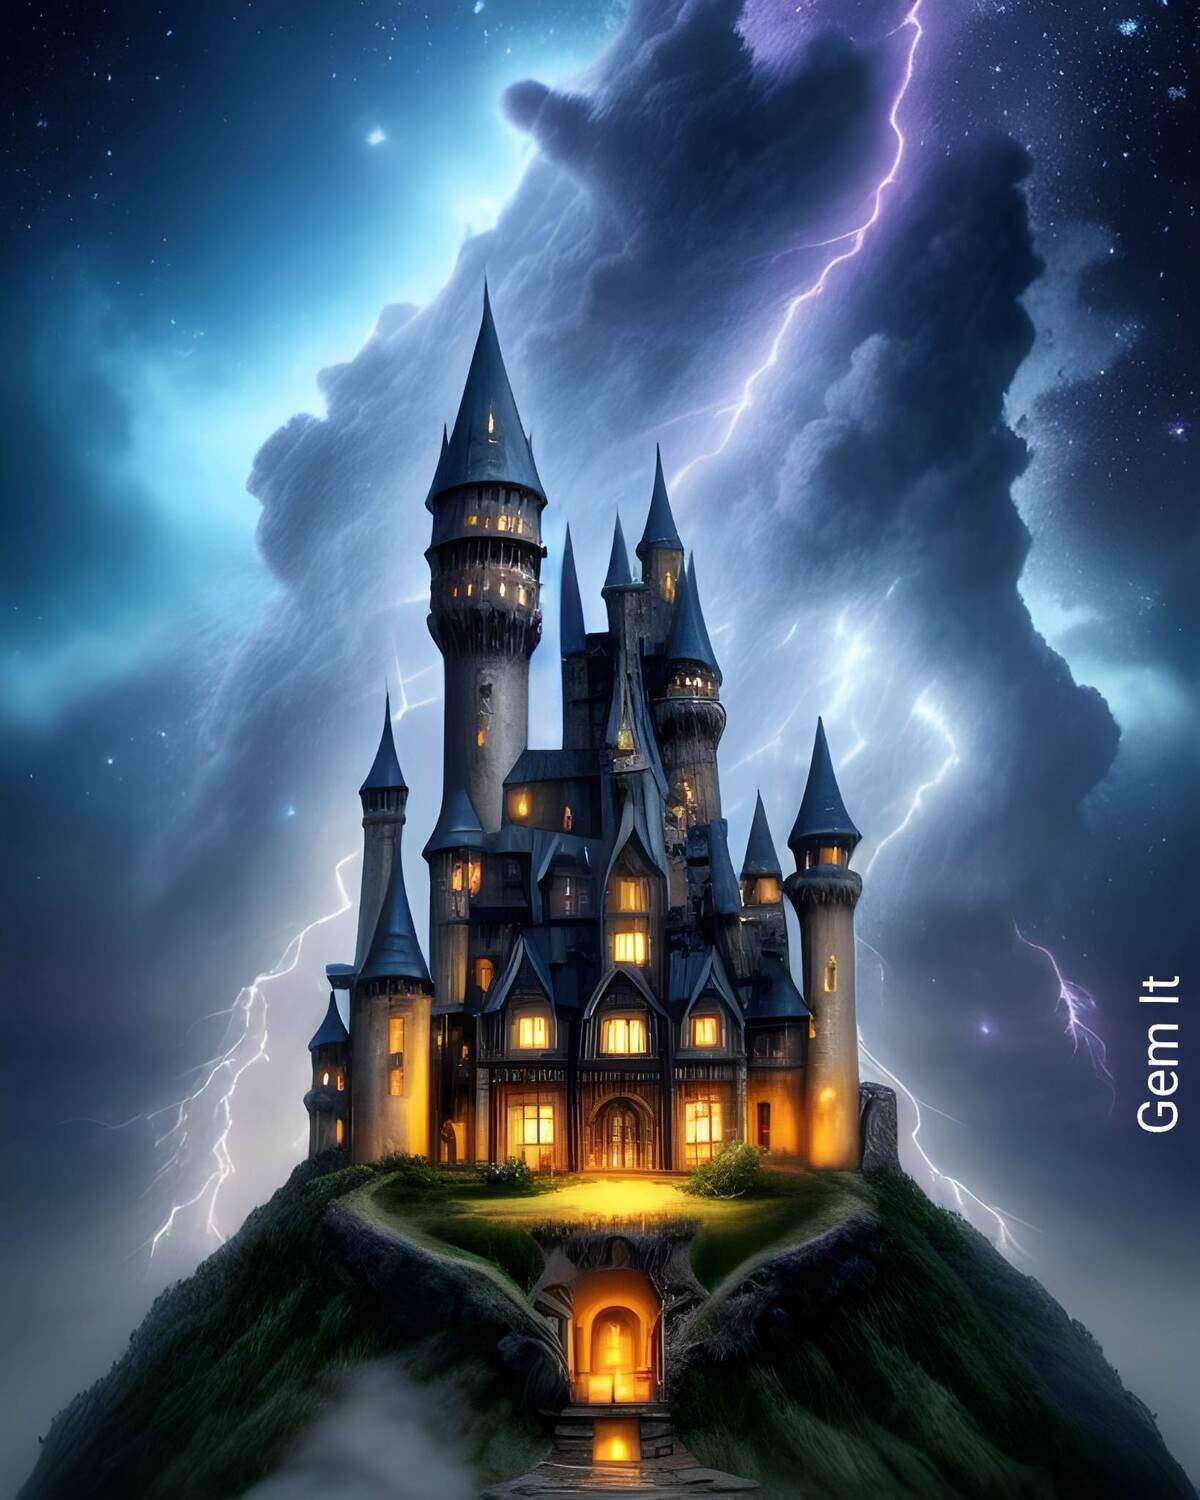 Wizards Castle B - Specially ordered for you. Delivery is approximately 4 - 6 weeks.